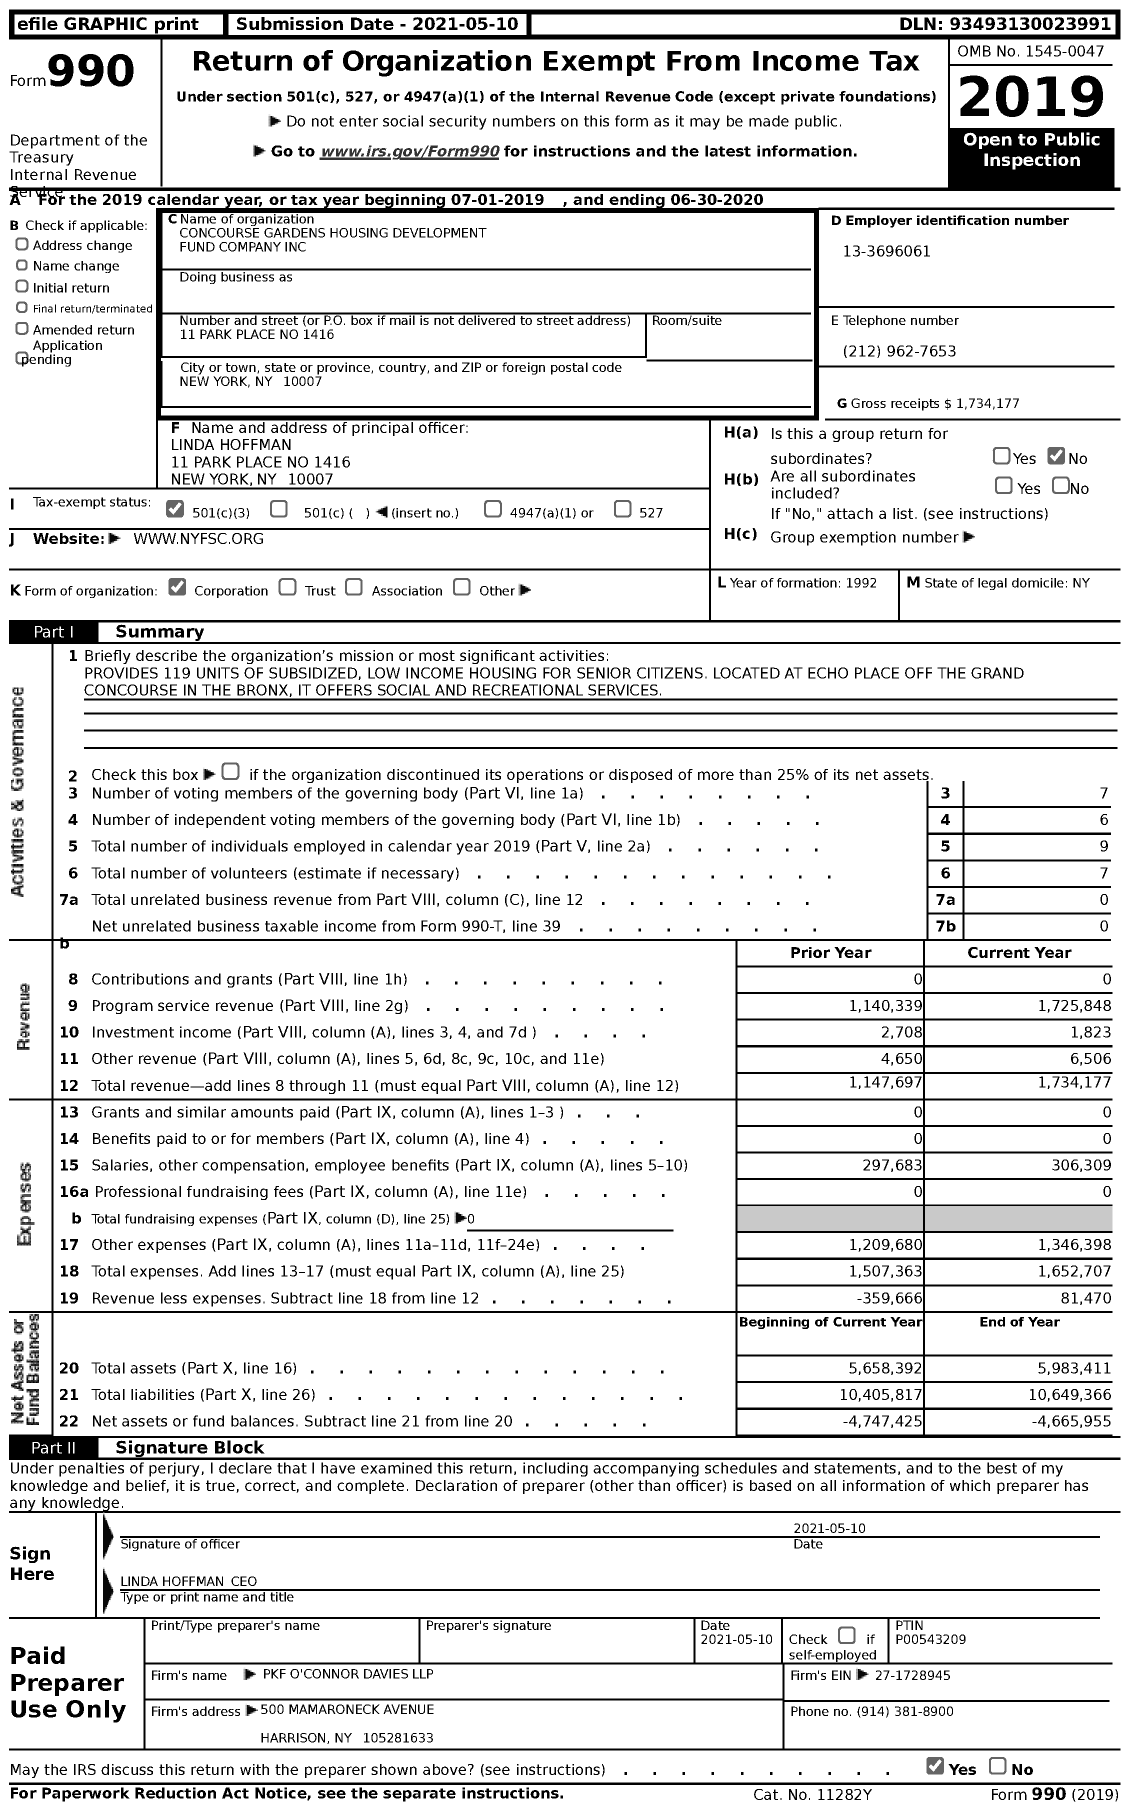 Image of first page of 2019 Form 990 for New York Foundation for Senior Citizens (NYFSC)